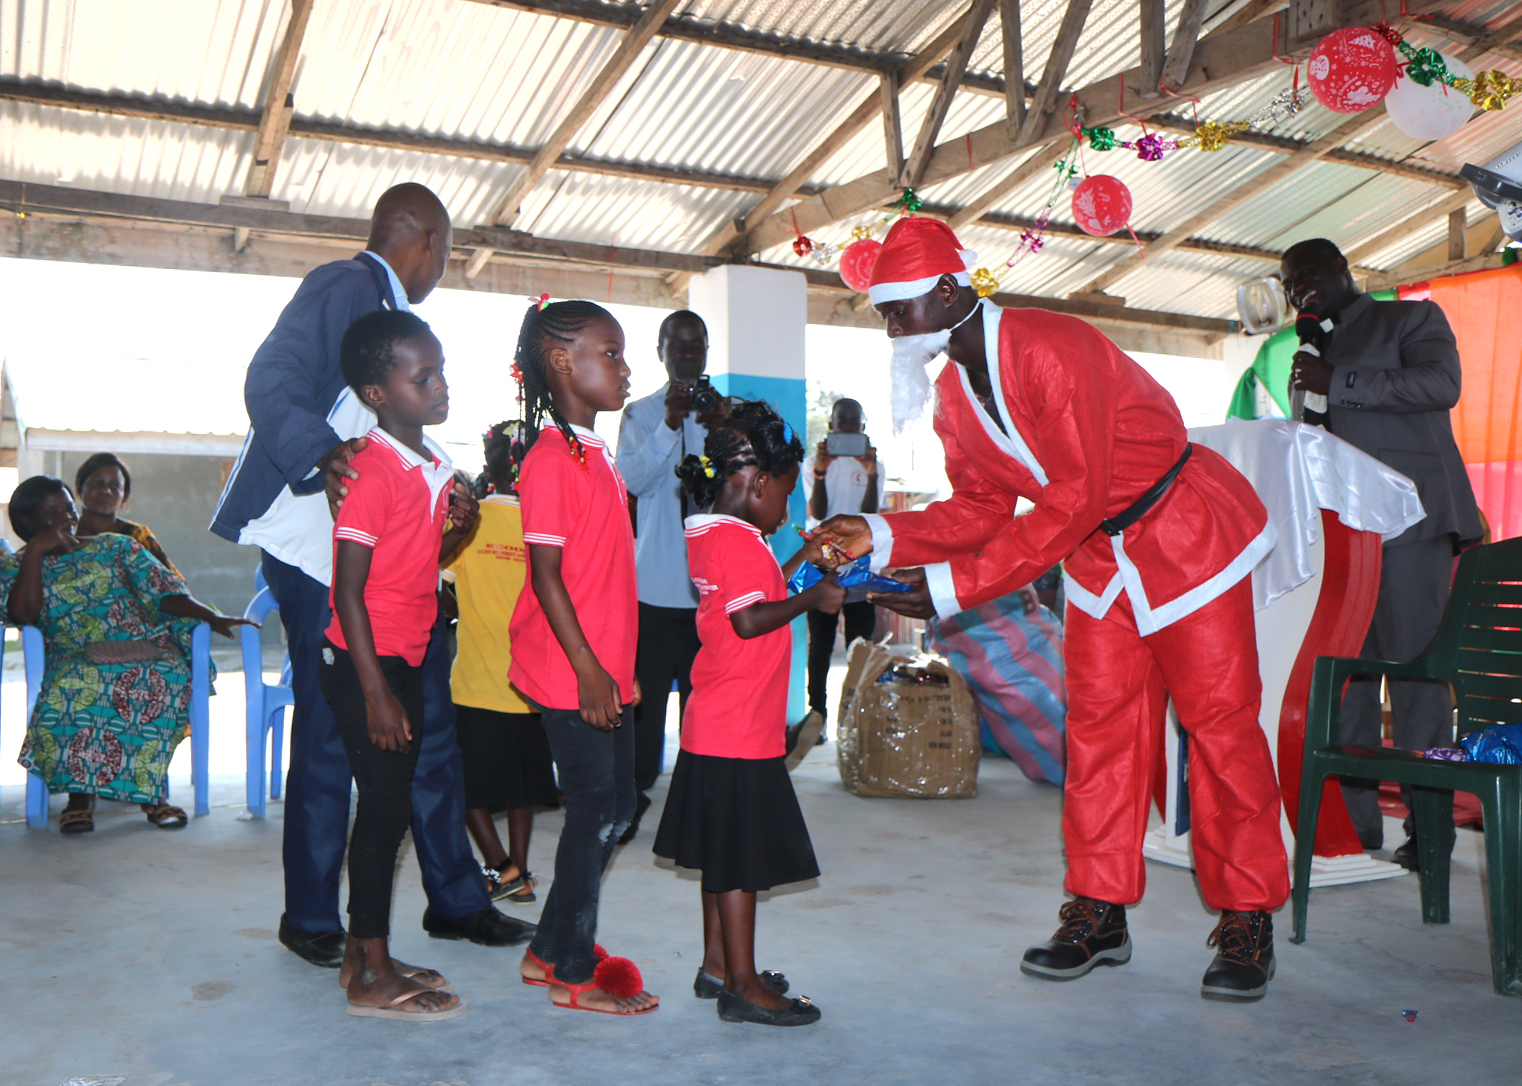 Children line up to receive a gift from Santa at Ampain Ivorian Refugee Camp in southwestern Ghana on Christmas Day. The Aboisso District of The United Methodist Church in Côte d’Ivoire organized the celebration and gifts for more than 540 children. Photo by Isaac Broune, UM News.